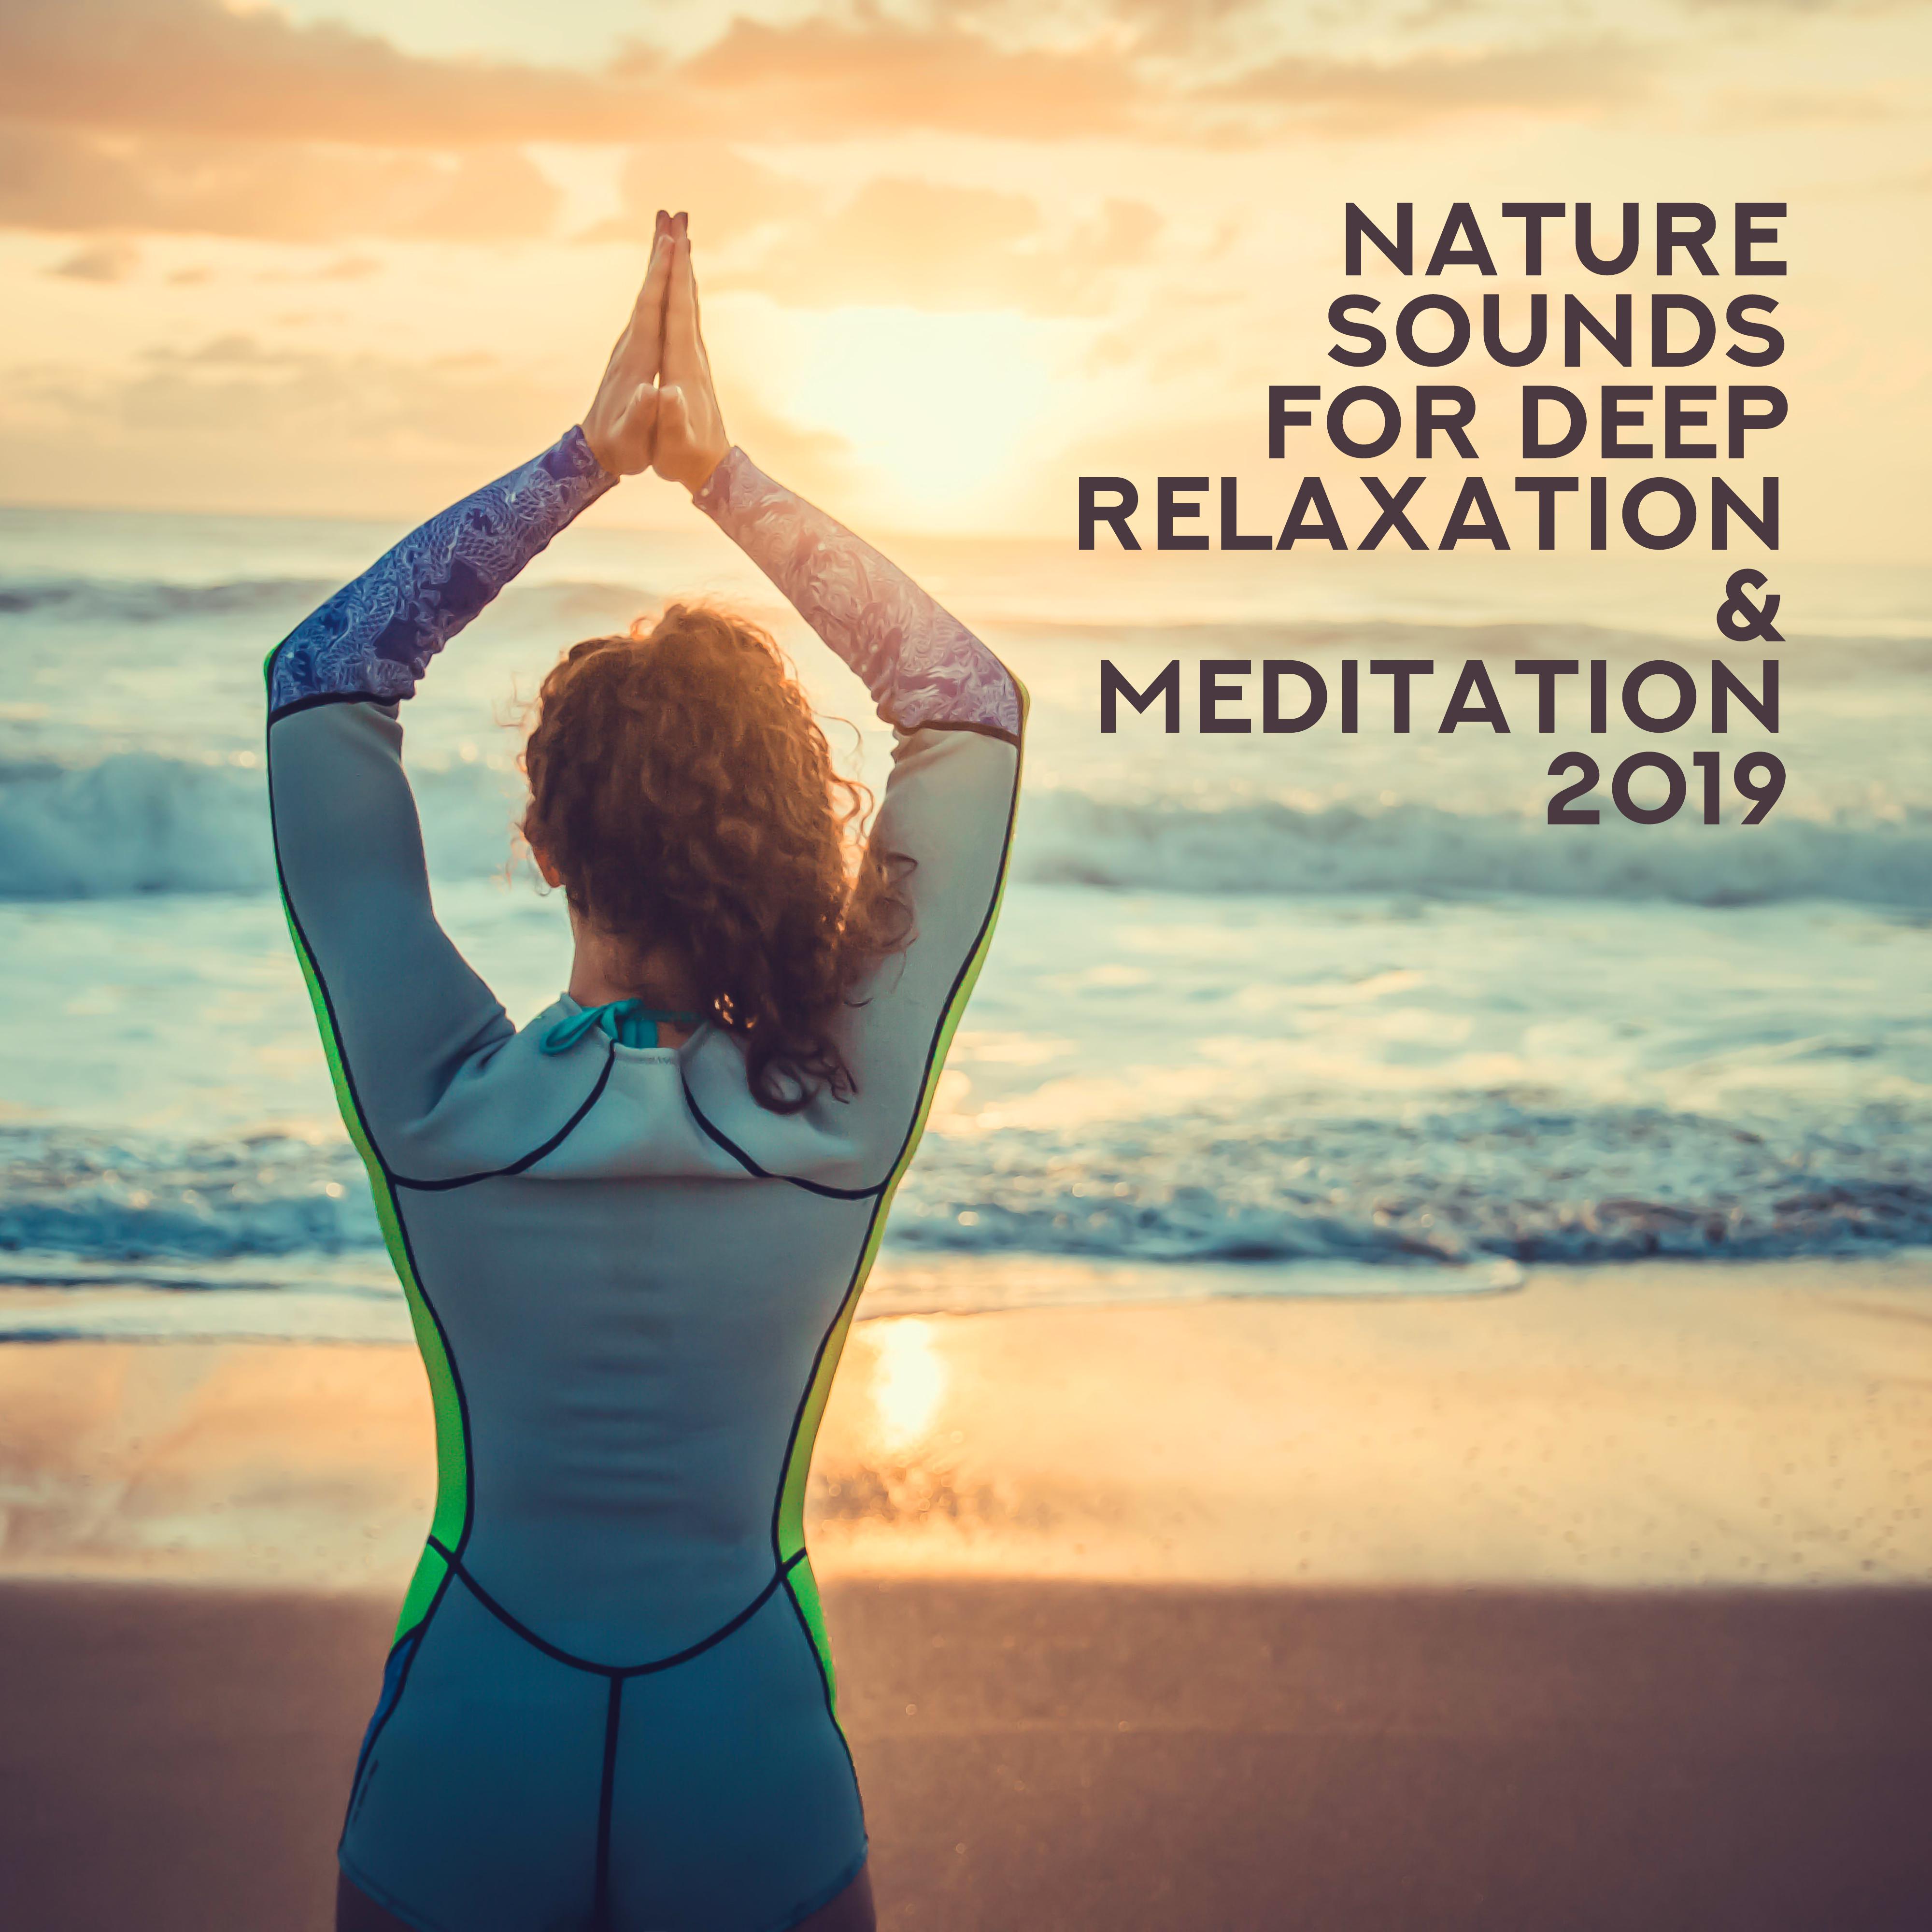 Nature Sounds for Deep Relaxation & Meditation 2019